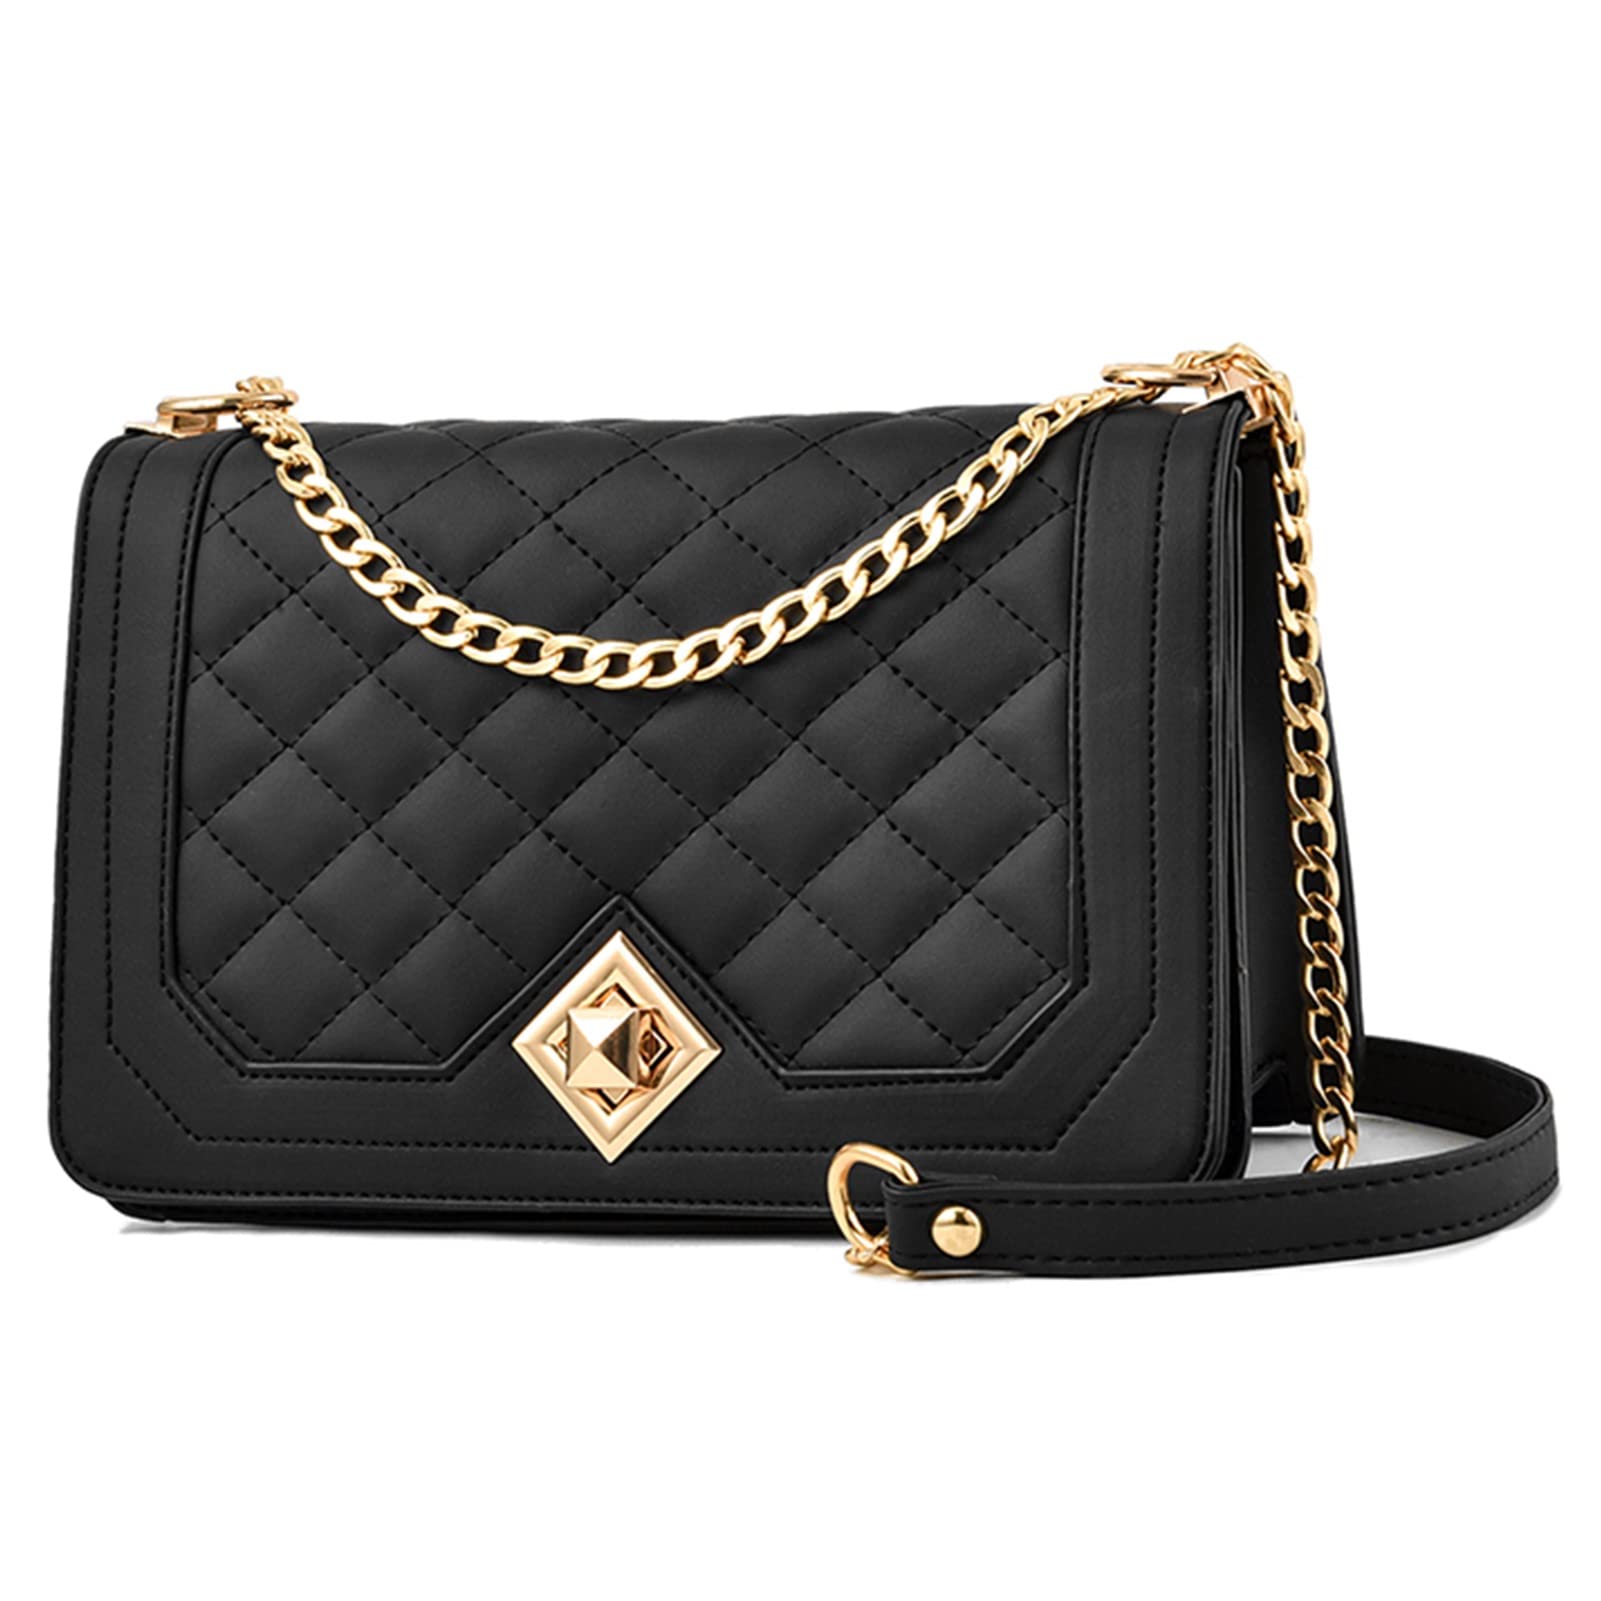 PRETTYMS Crossbody Bags for Women Small Handbags PU Leather Shoulder Bag Purse Evening Bag Quilted Satchels with Chain Strap